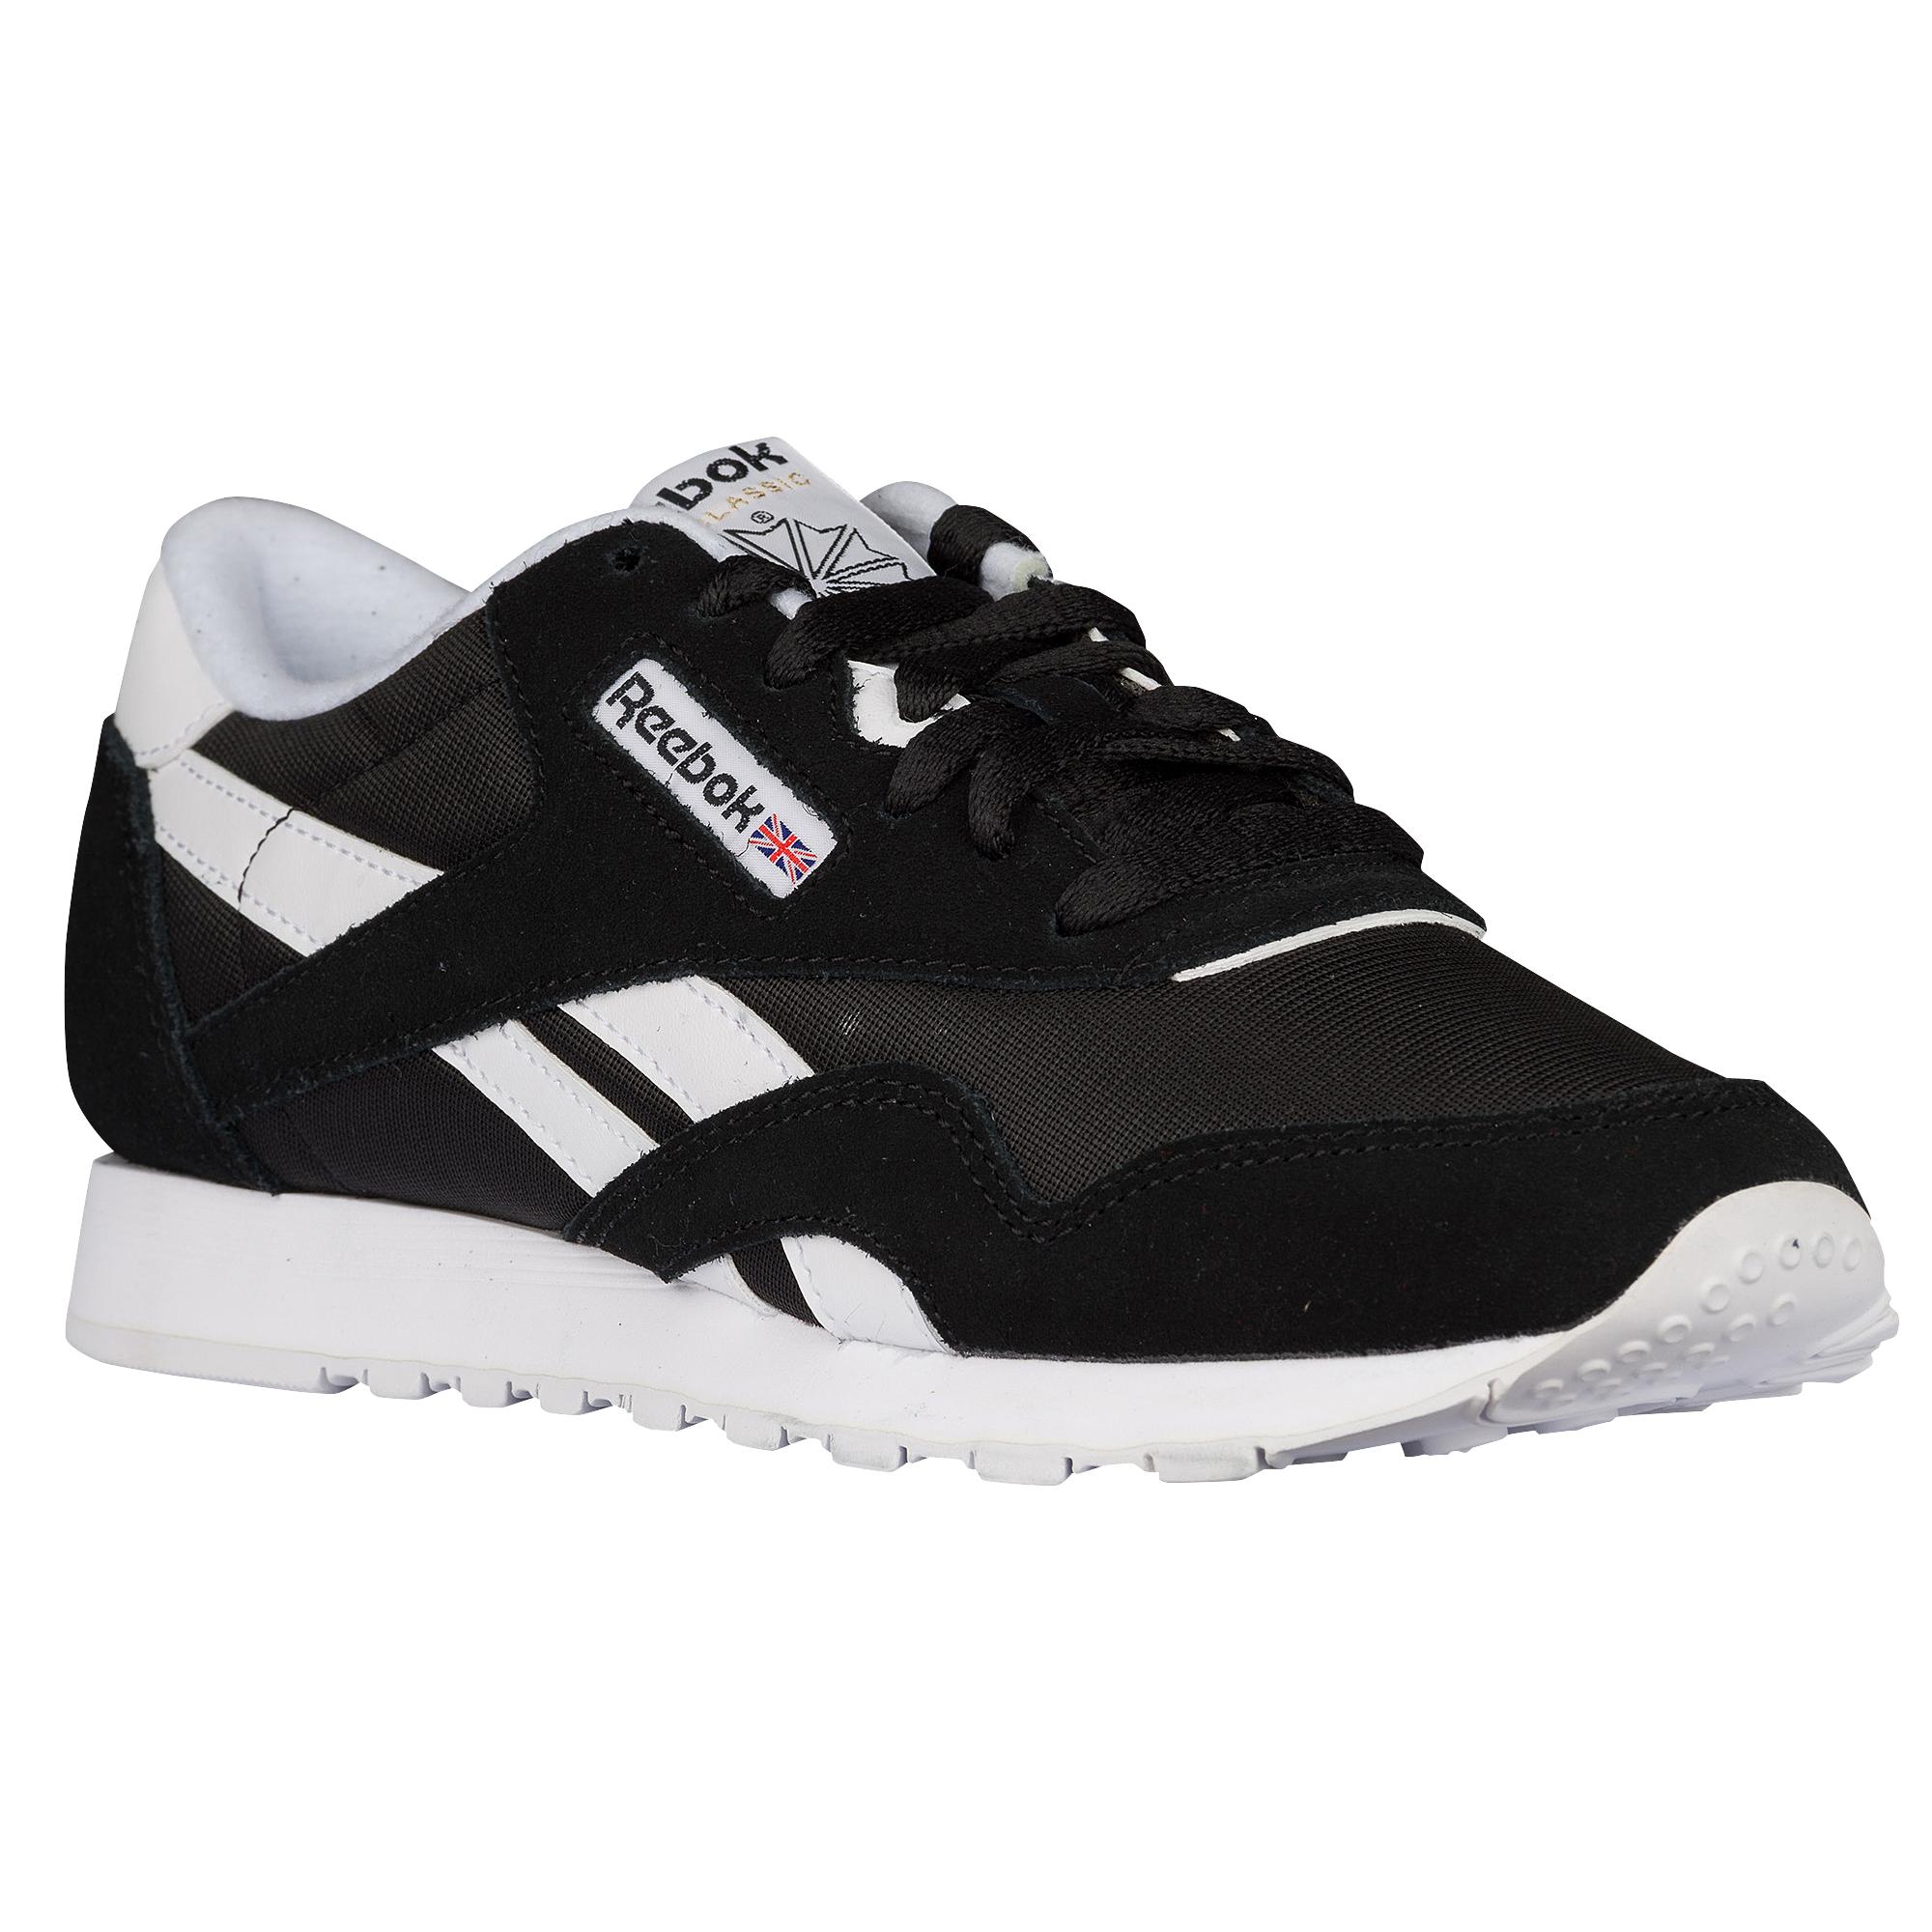 Reebok Synthetic Classic Nylon Running Shoes in Black/White (Black) - Lyst